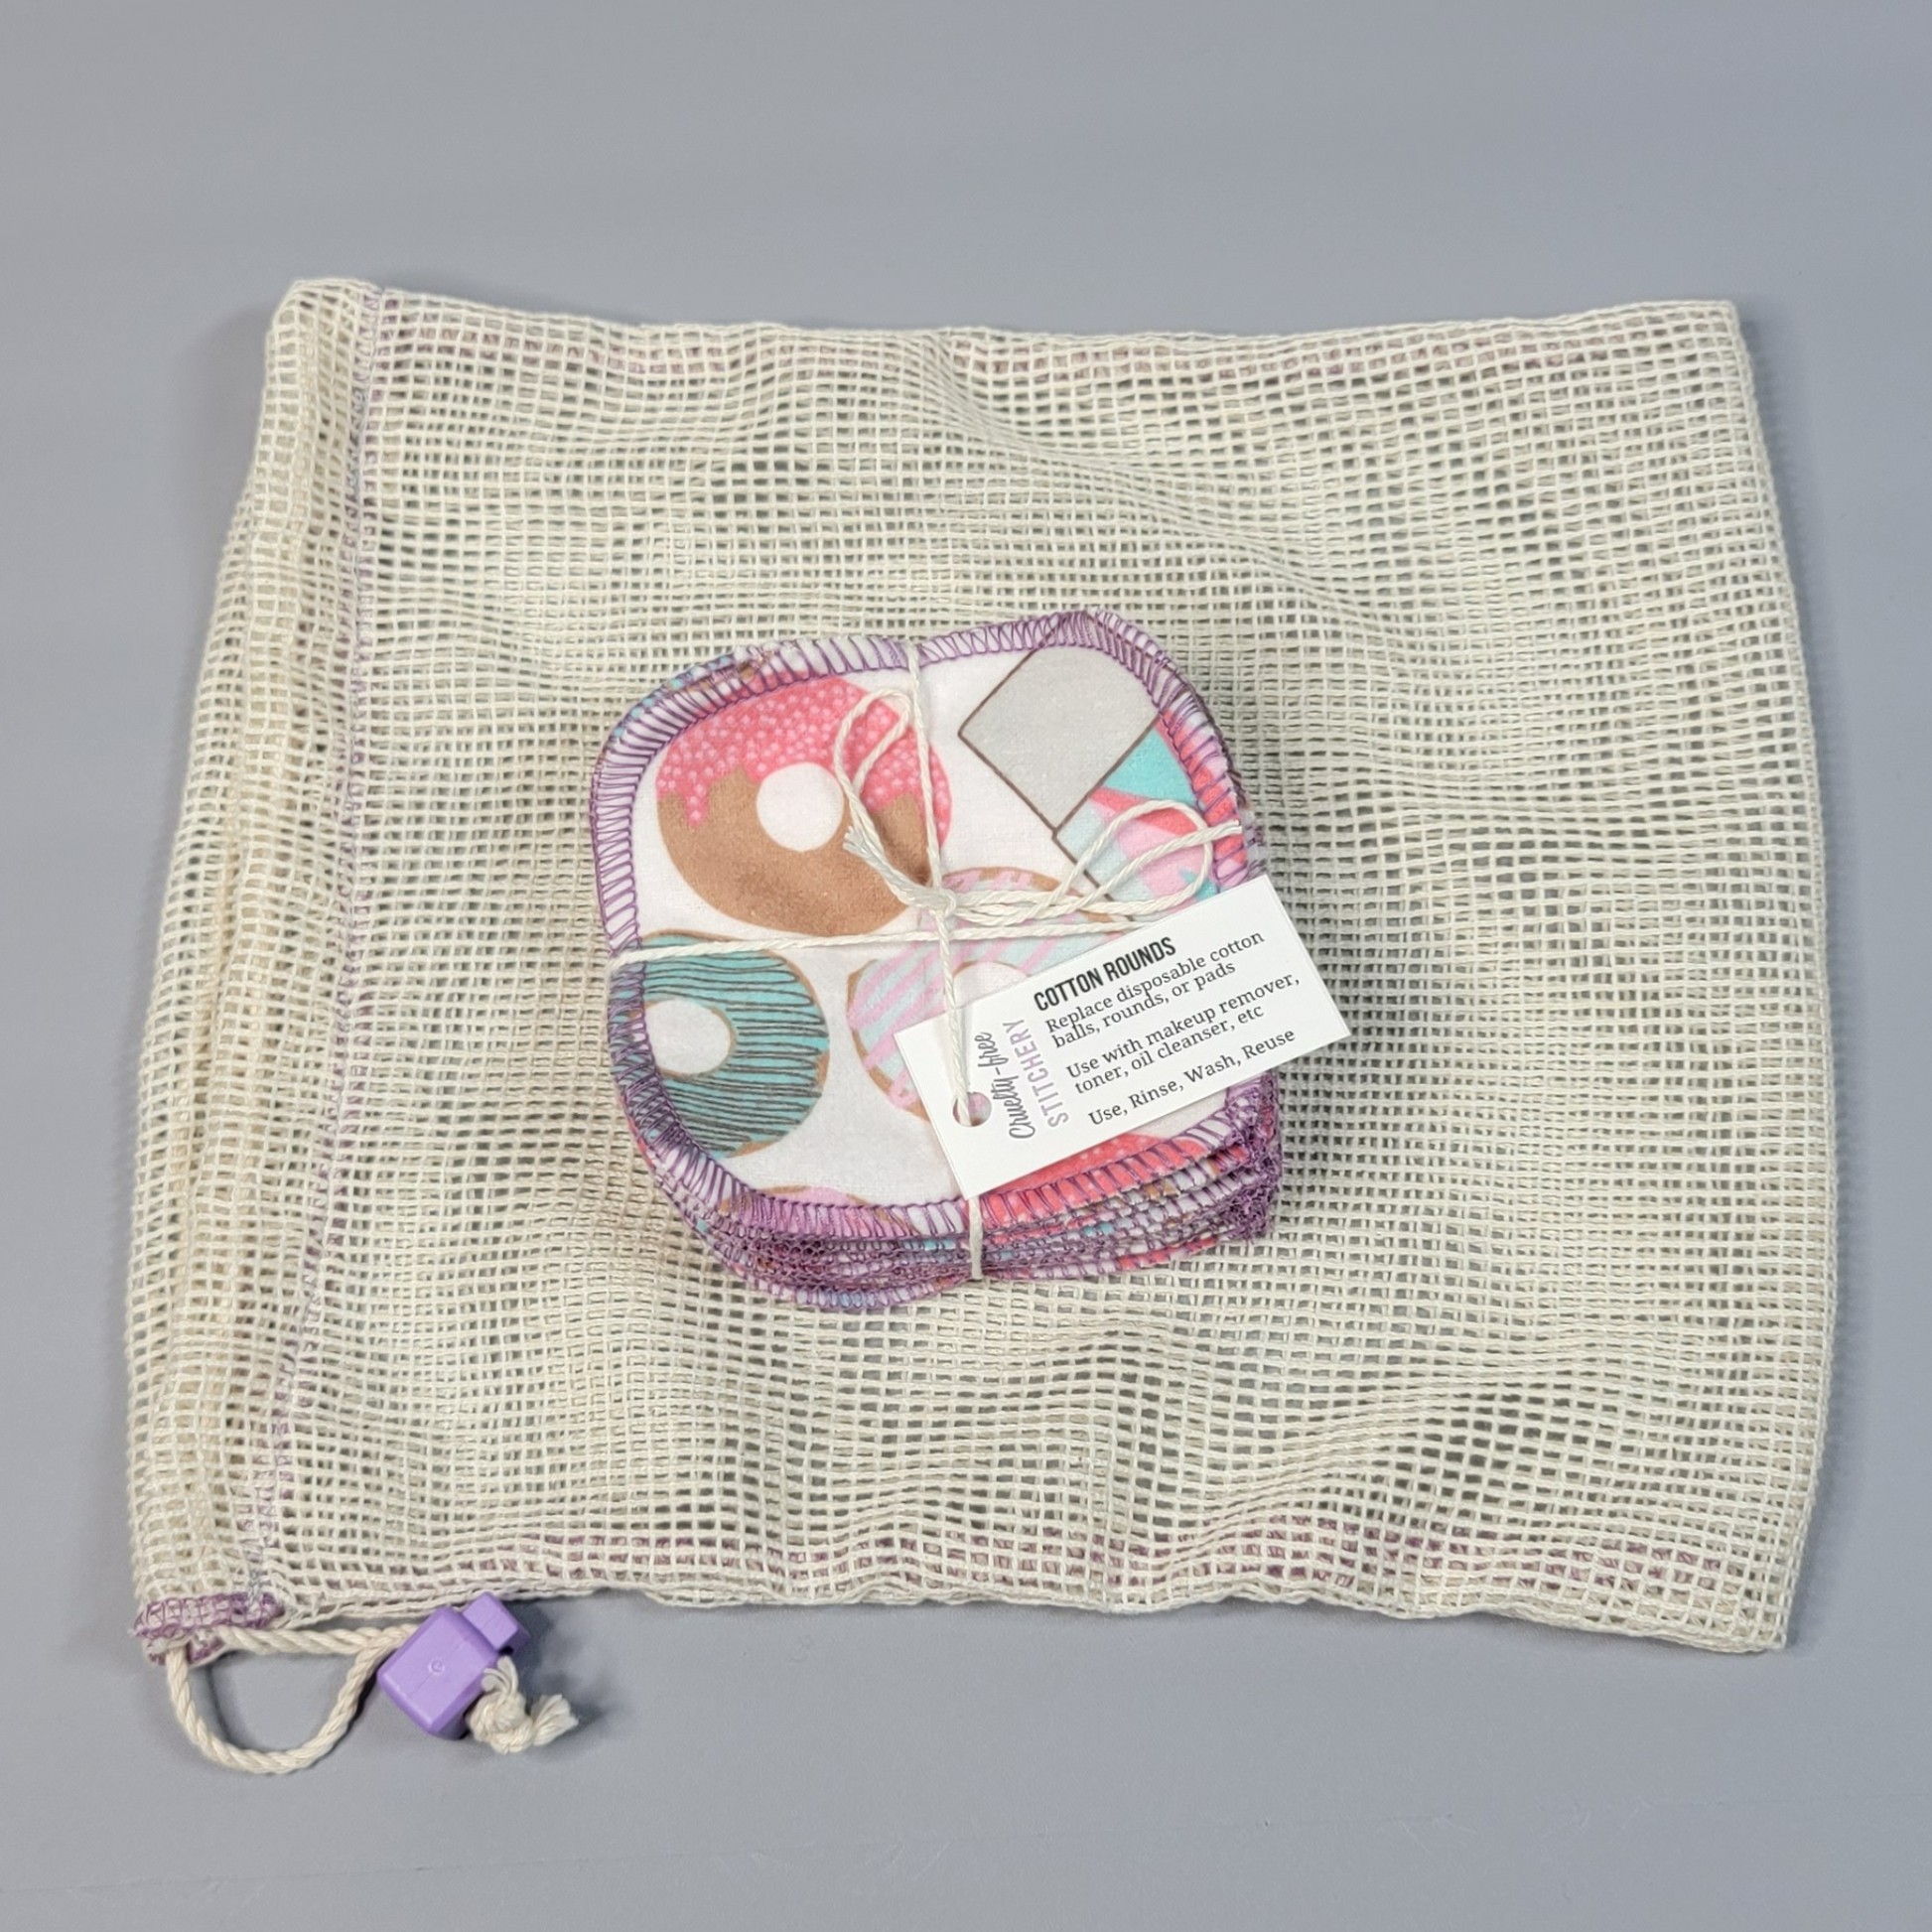 Bundled pack of cotton rounds on top of a mesh drawstring bag. The bag is a natural off-white colored square mesh, with a light purple cord stop.